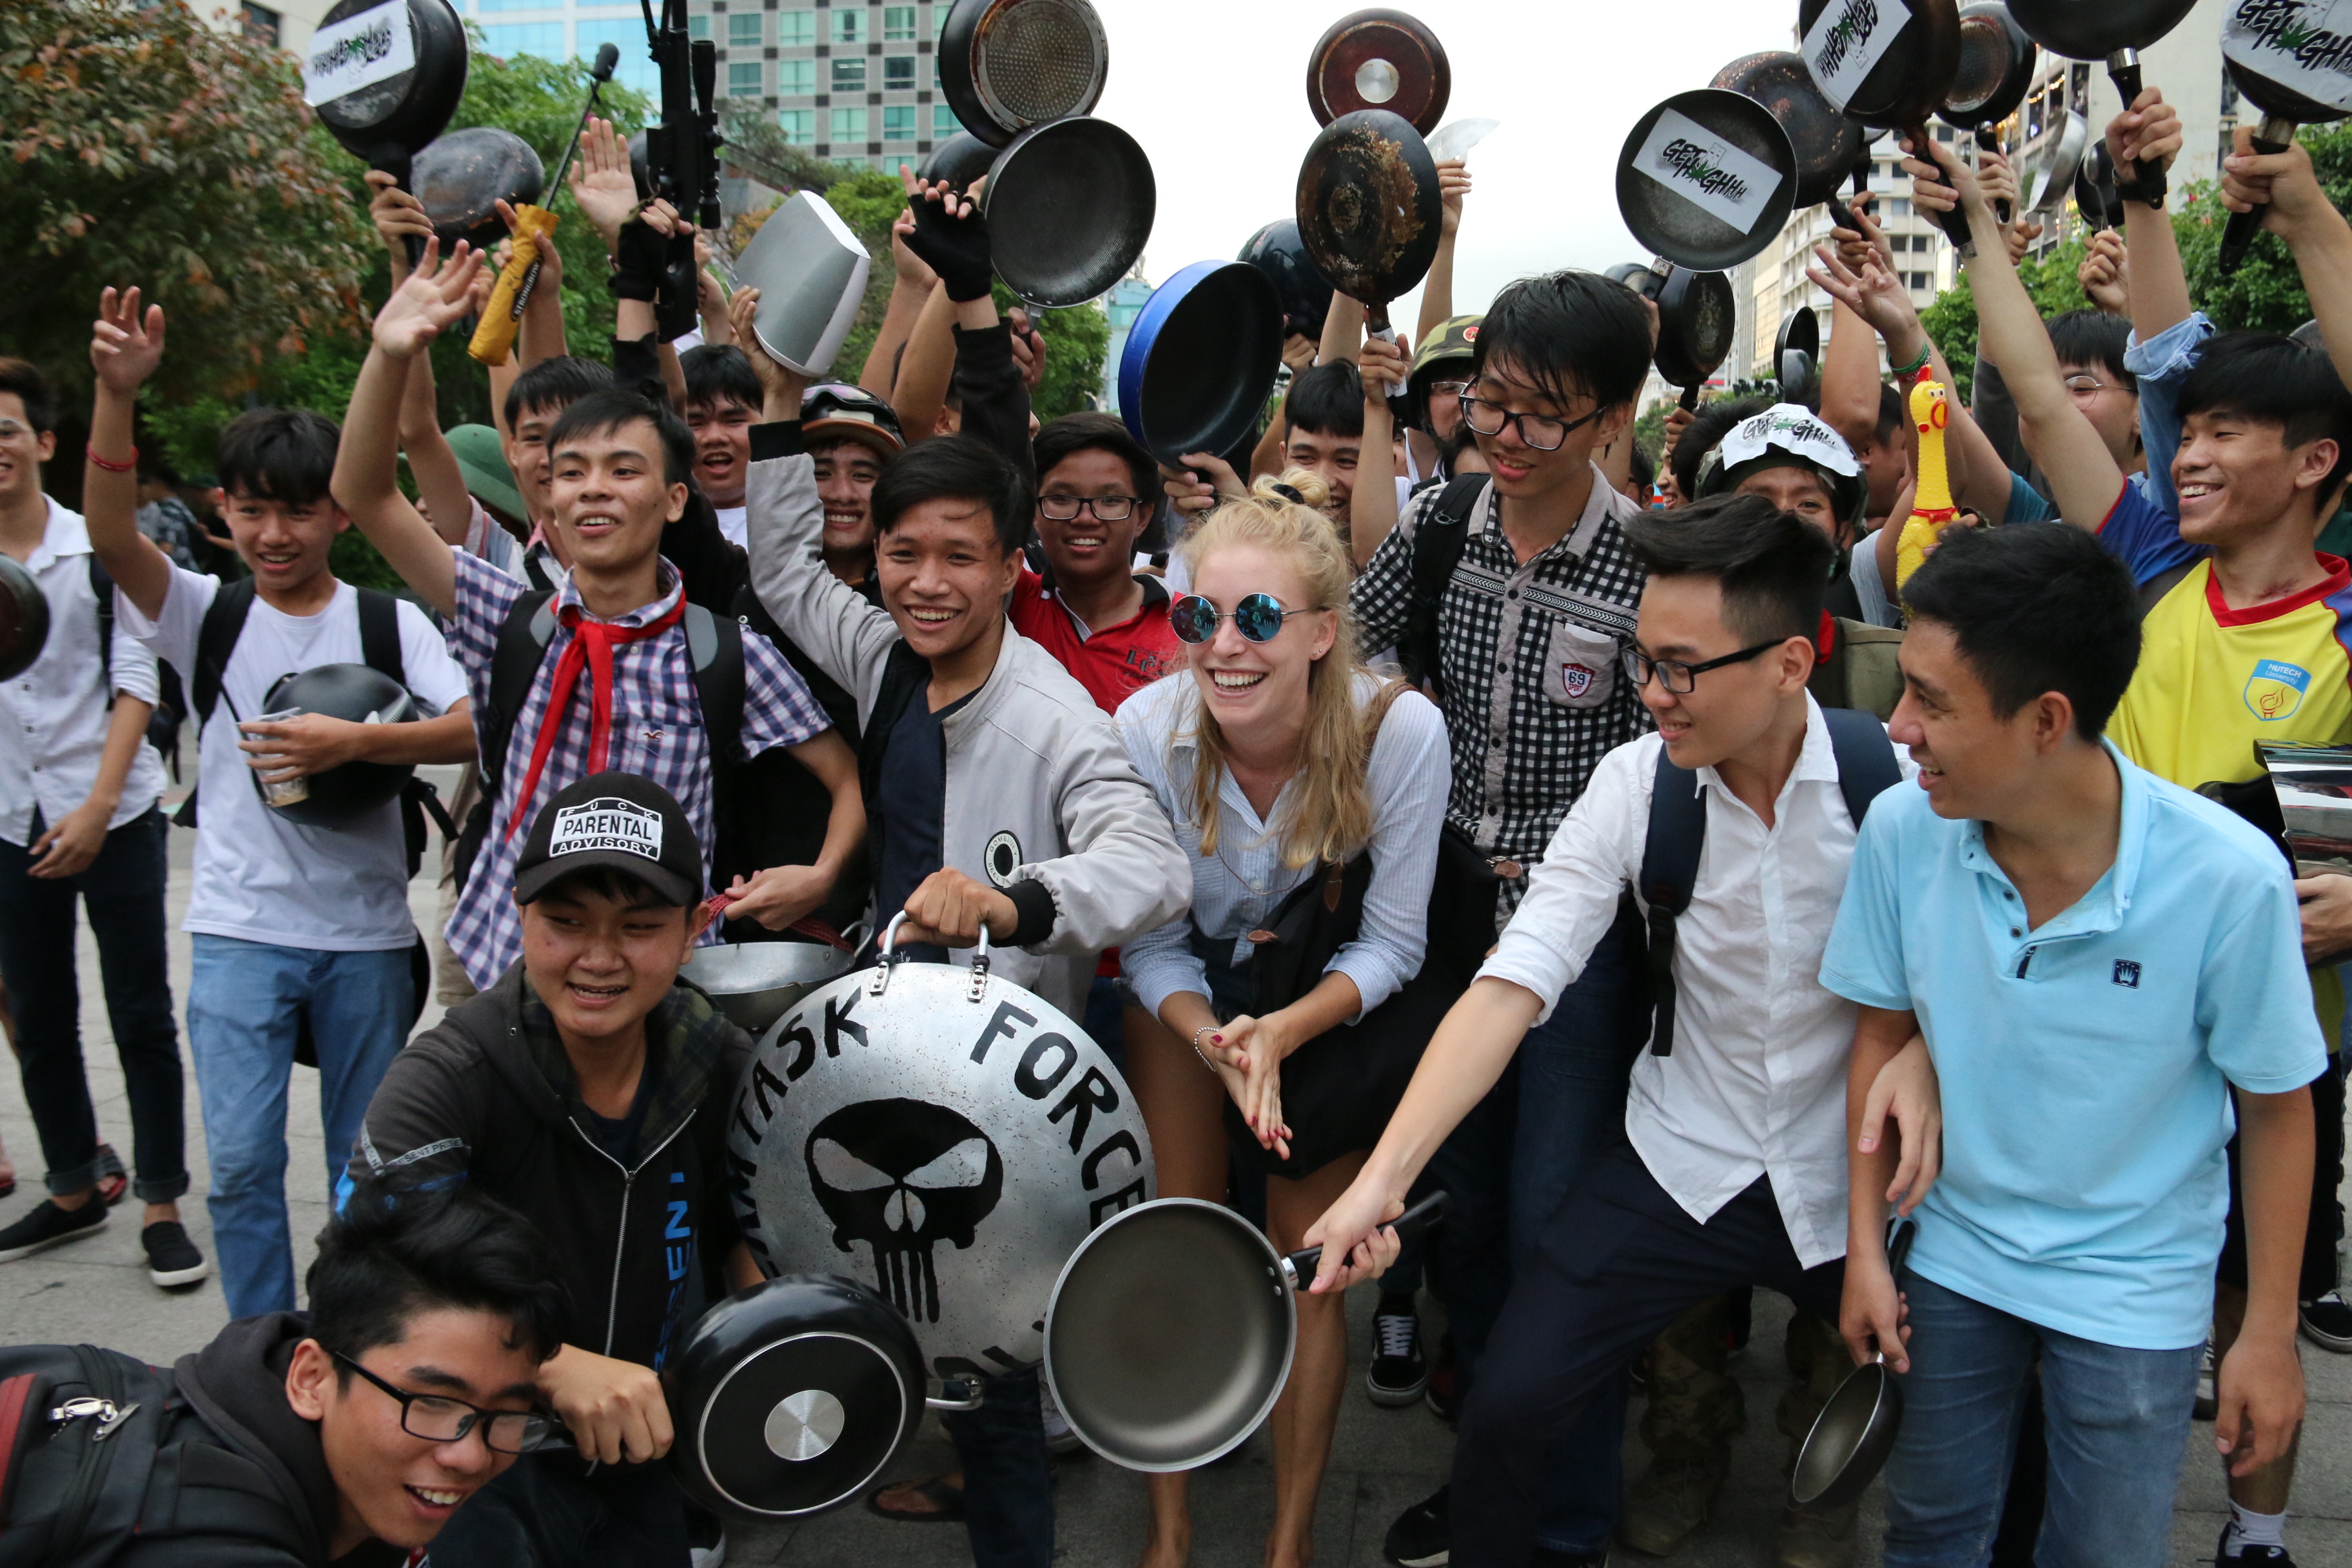 Ho Chi Minh City youths raise frying pans in PlayerUnknown's Battleground simulation